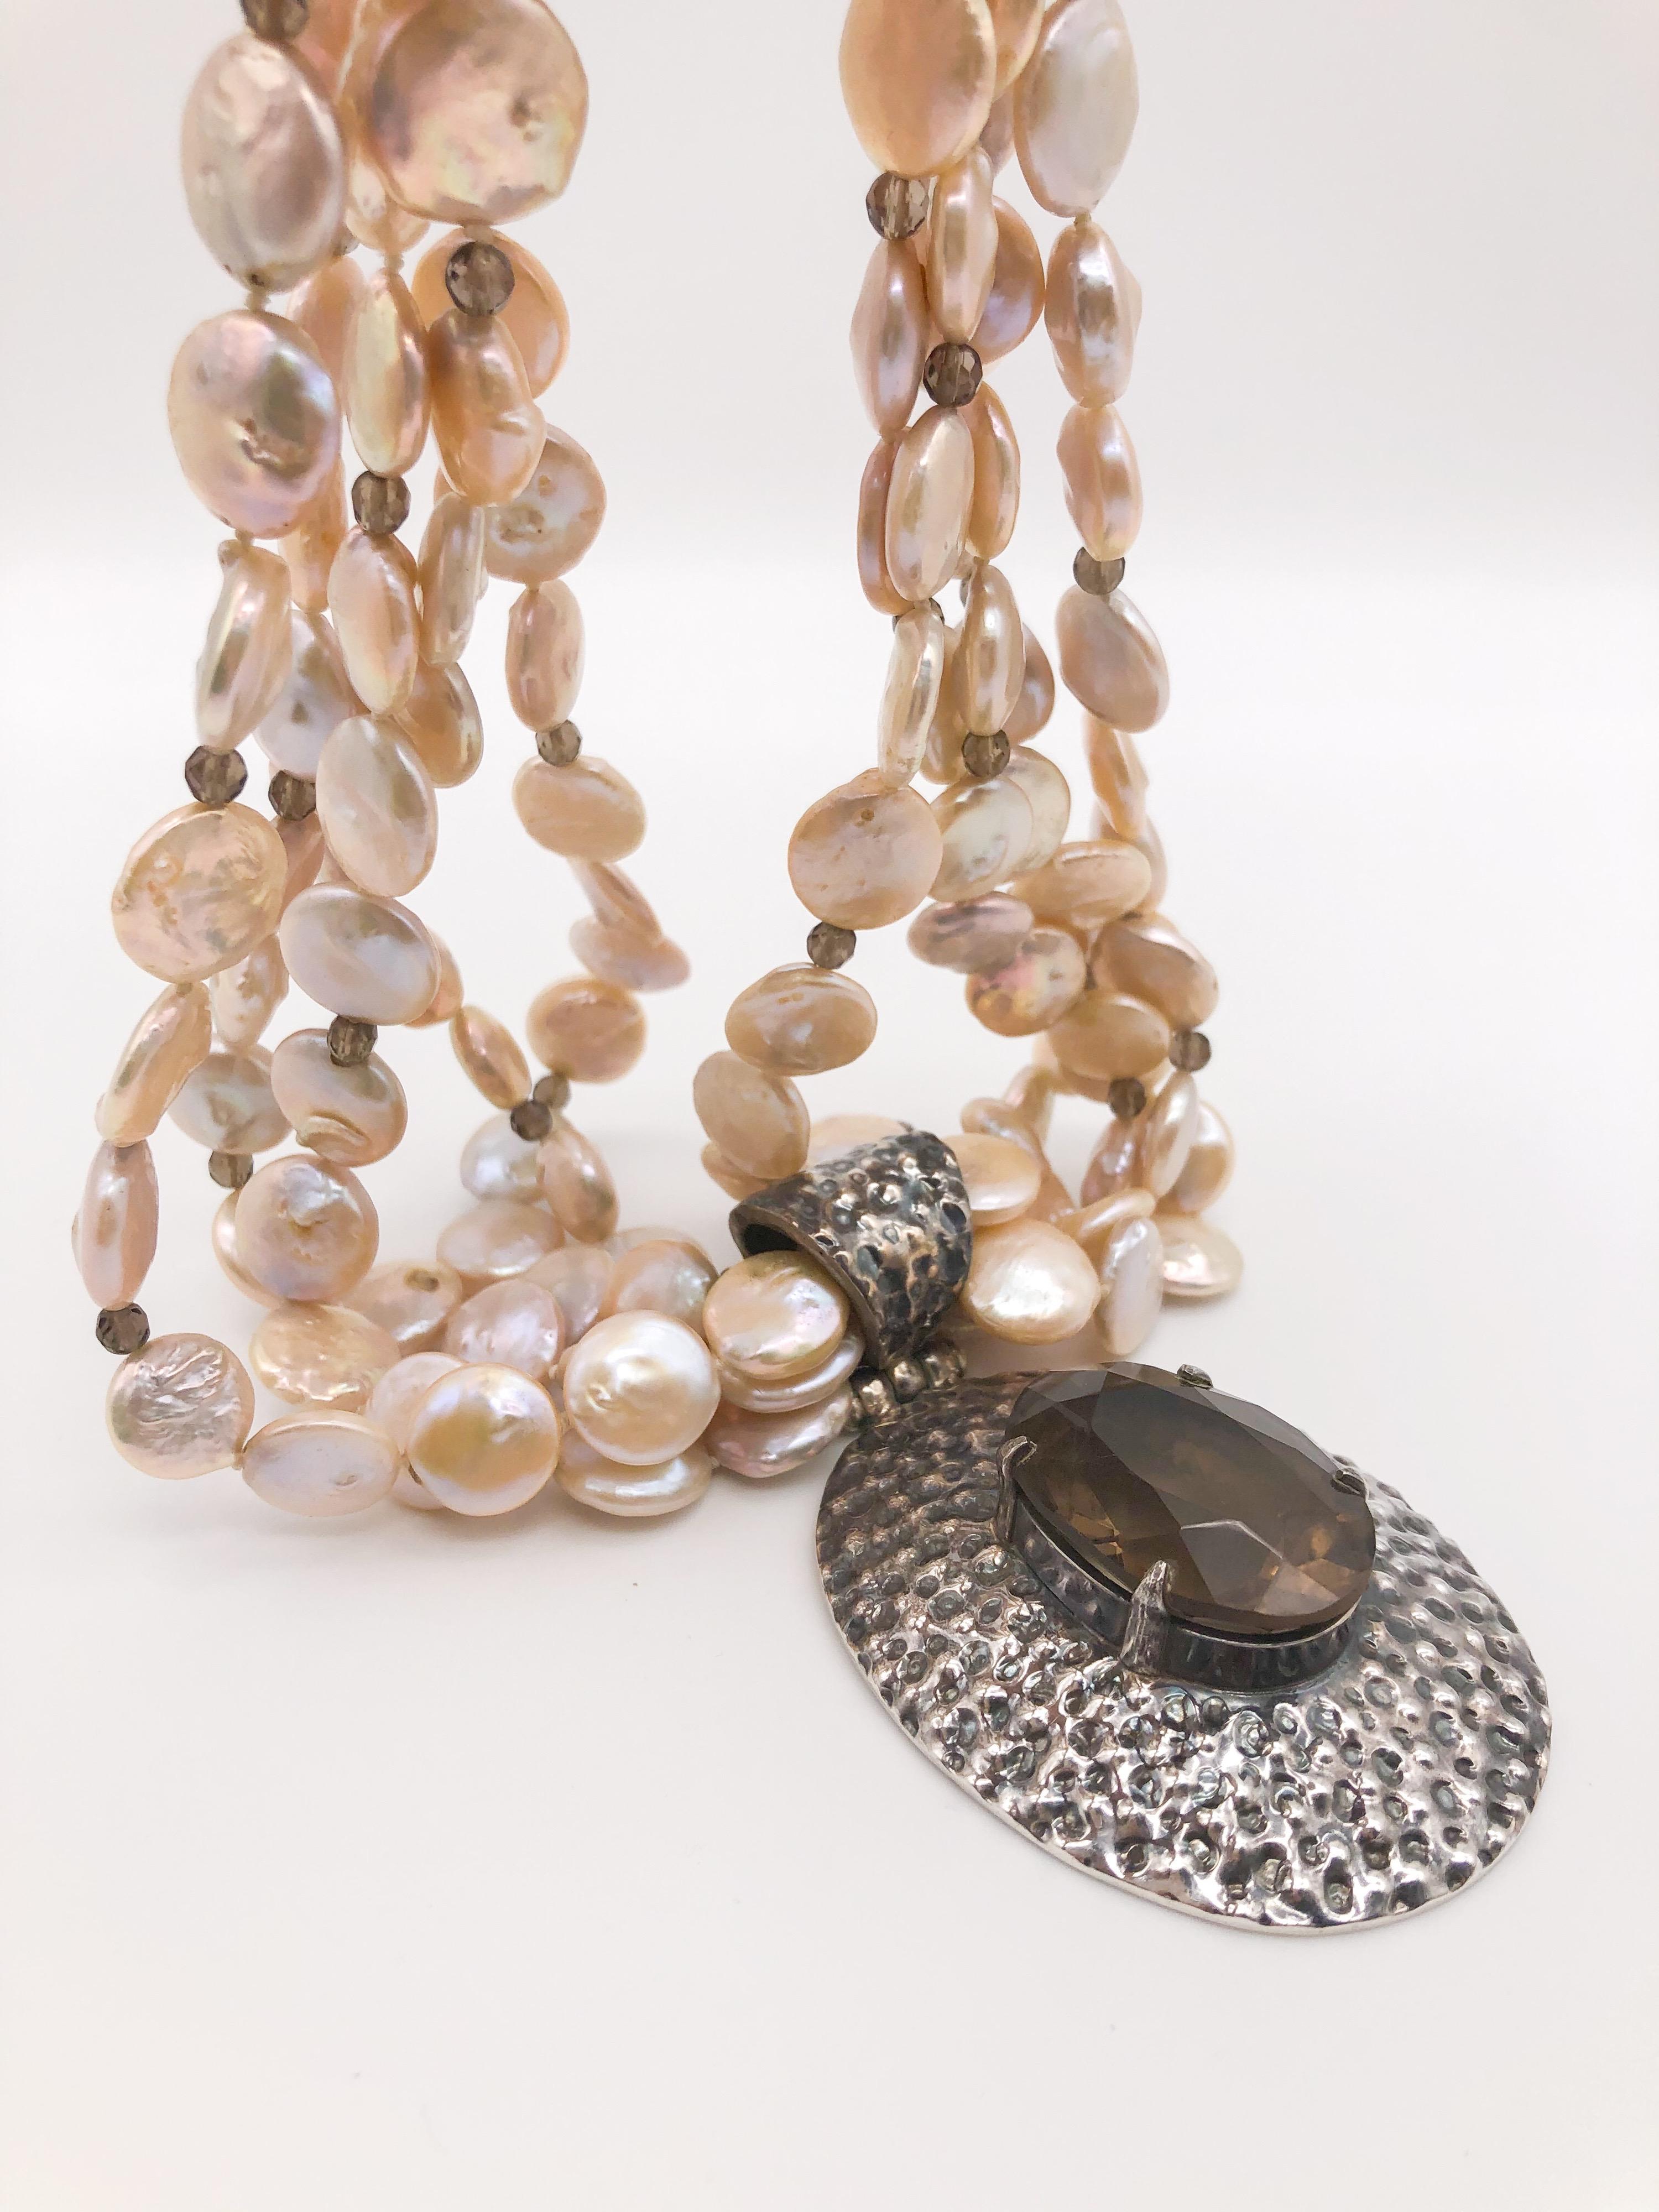 Mixed Cut A.Jeschel 5 strand coin pearl necklace and Smokey Quartz necklace. For Sale